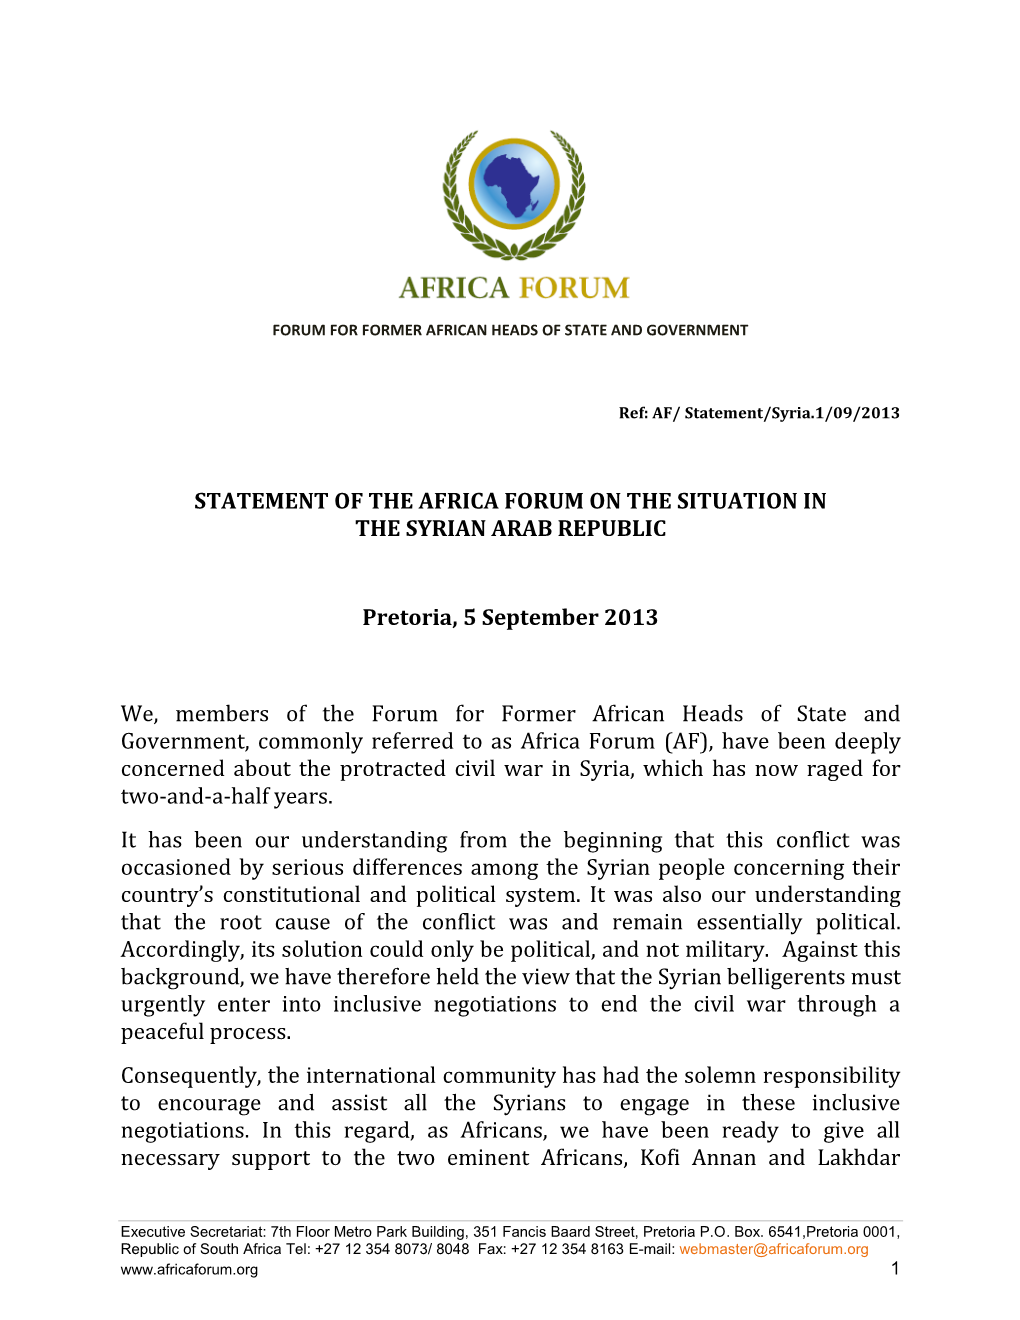 Statement of the Africa Forum on the Situation in Syria